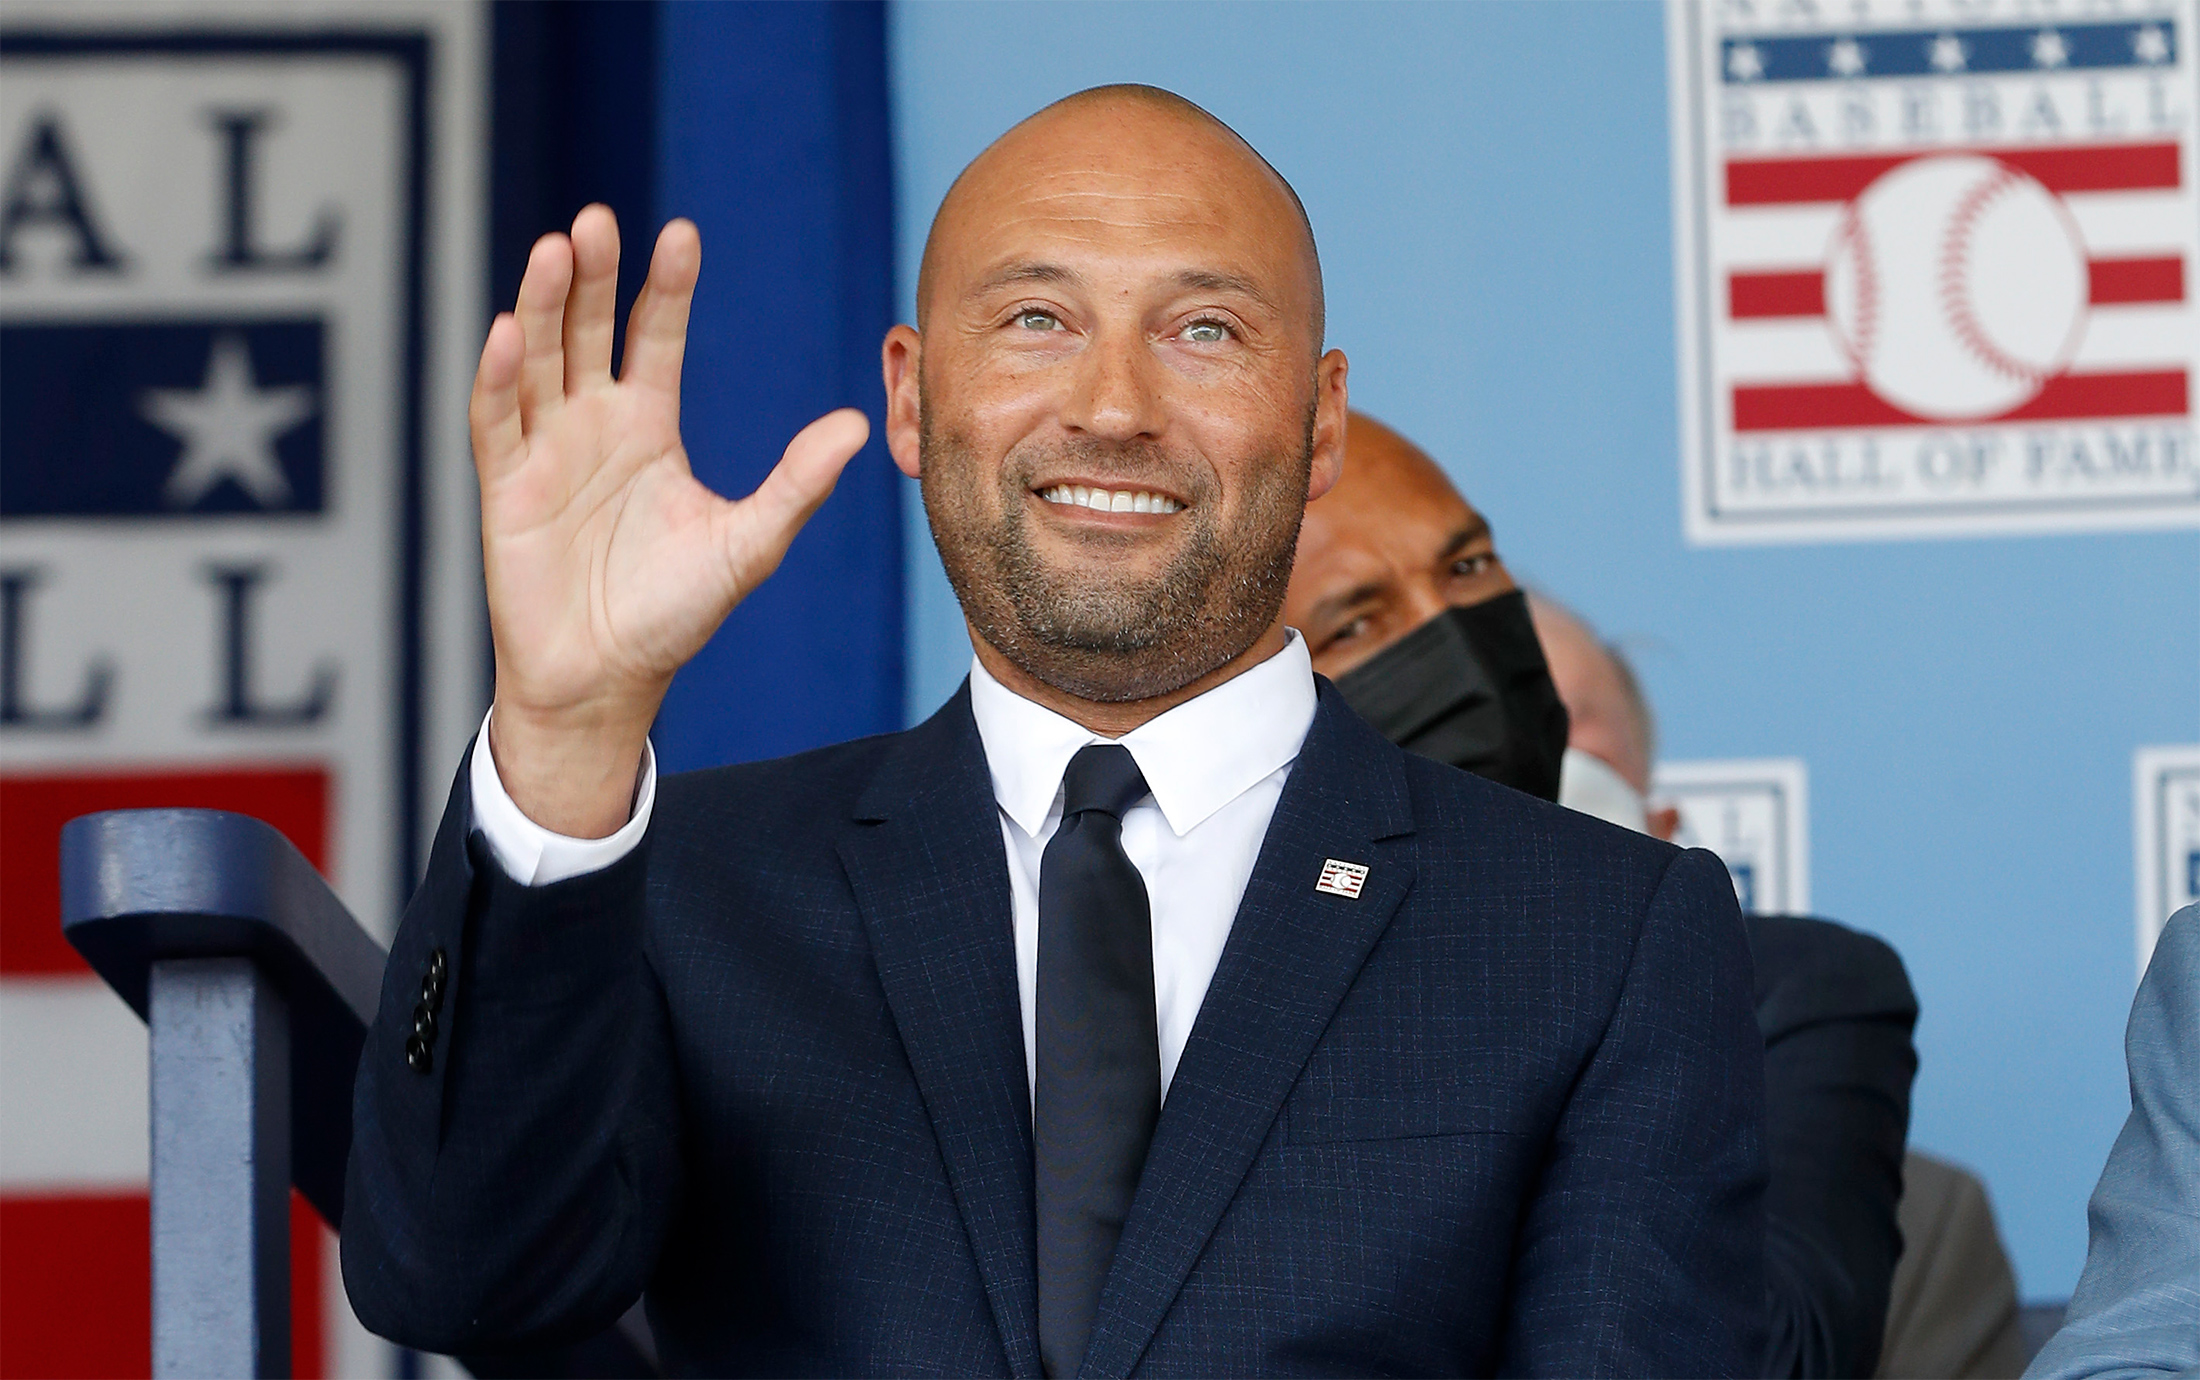 Derek Jeter's 10 life lessons for America's leaders - MarketWatch